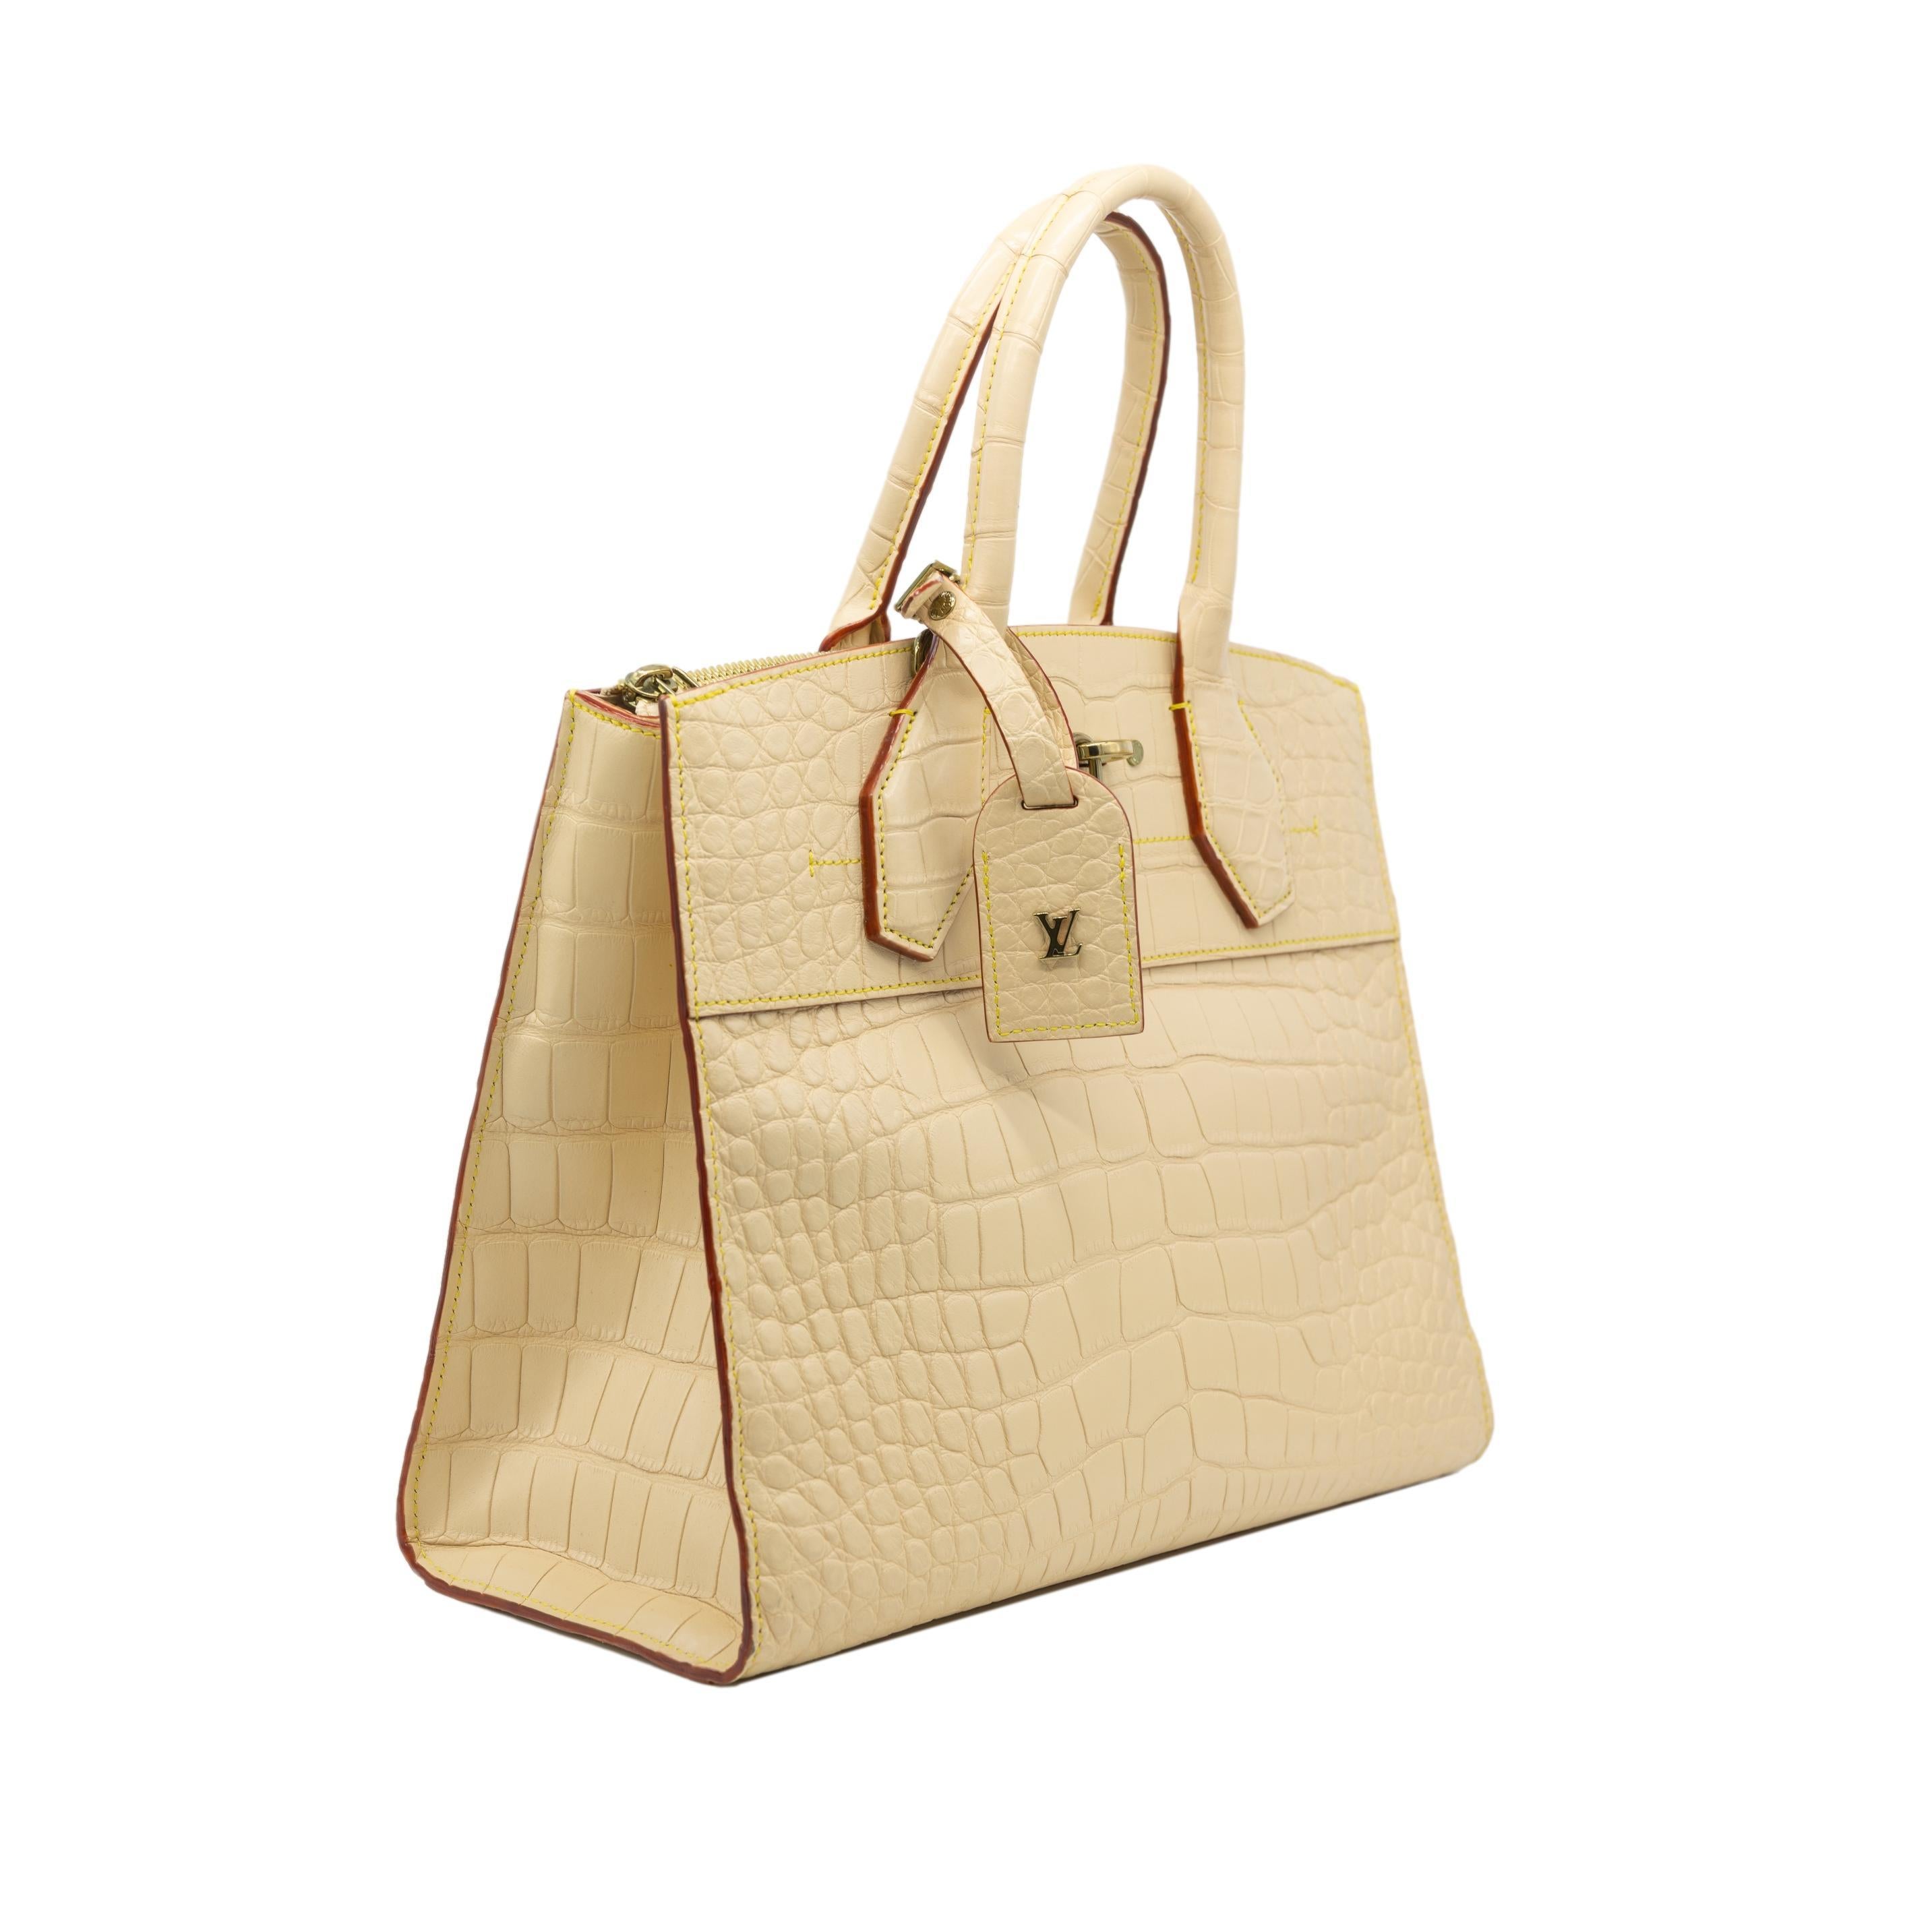 Louis Vuitton Limited Edition Matte Vanilla Alligator Top Handle City Steamer MM Bag, 2015. This  steamer bag is a classic Louis Vuitton closet staple which was first introduced and designed by Nicolas Ghesquière for cruise-ship passengers in 1901.